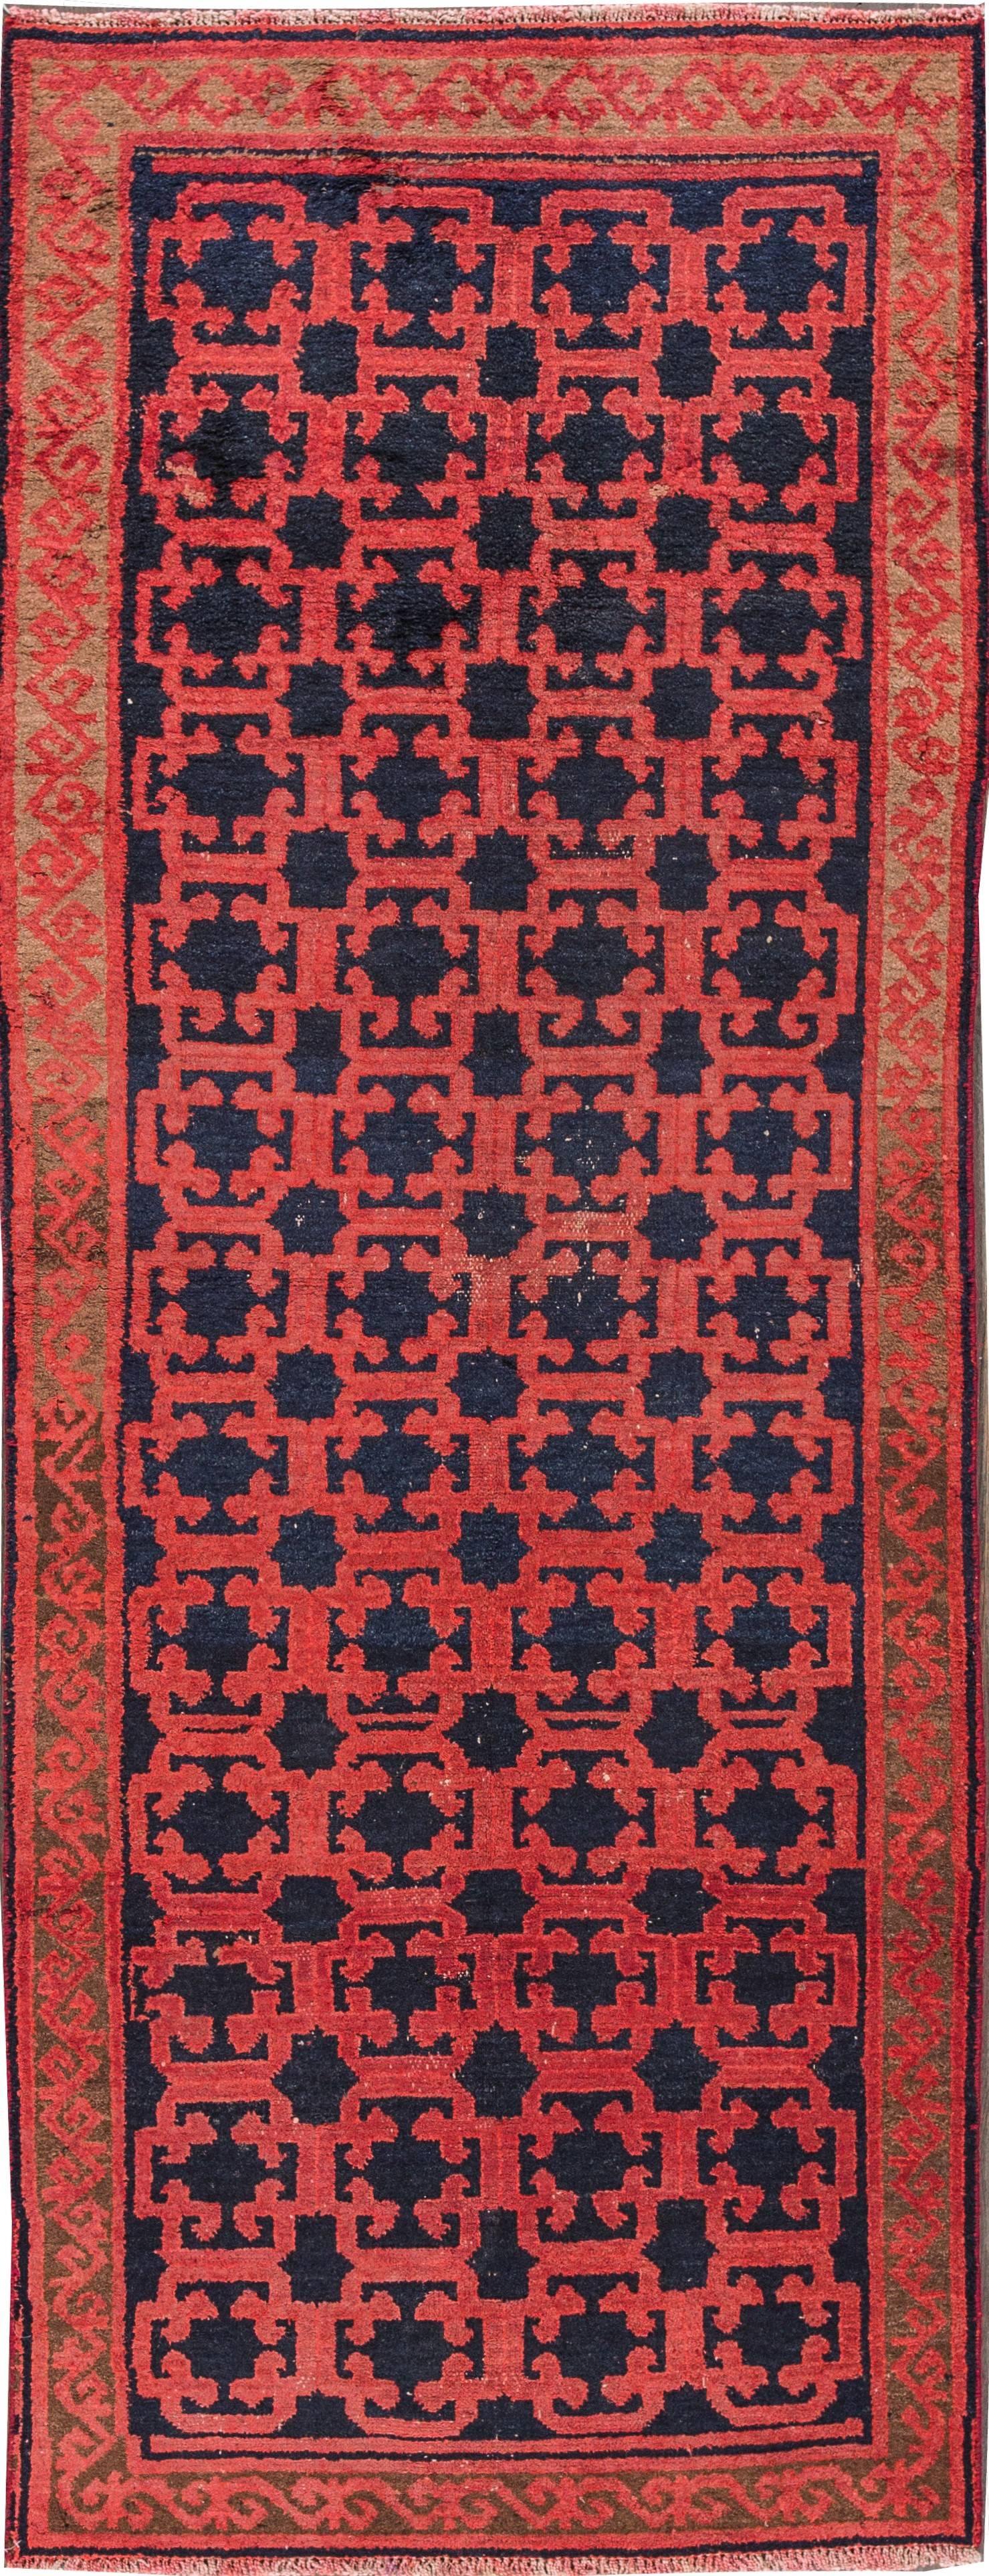 1920's Turkish Khotan carpet with a red field and blue geometric, measures approximately 4 feet 1 inch by 8 feet 6 inches. 